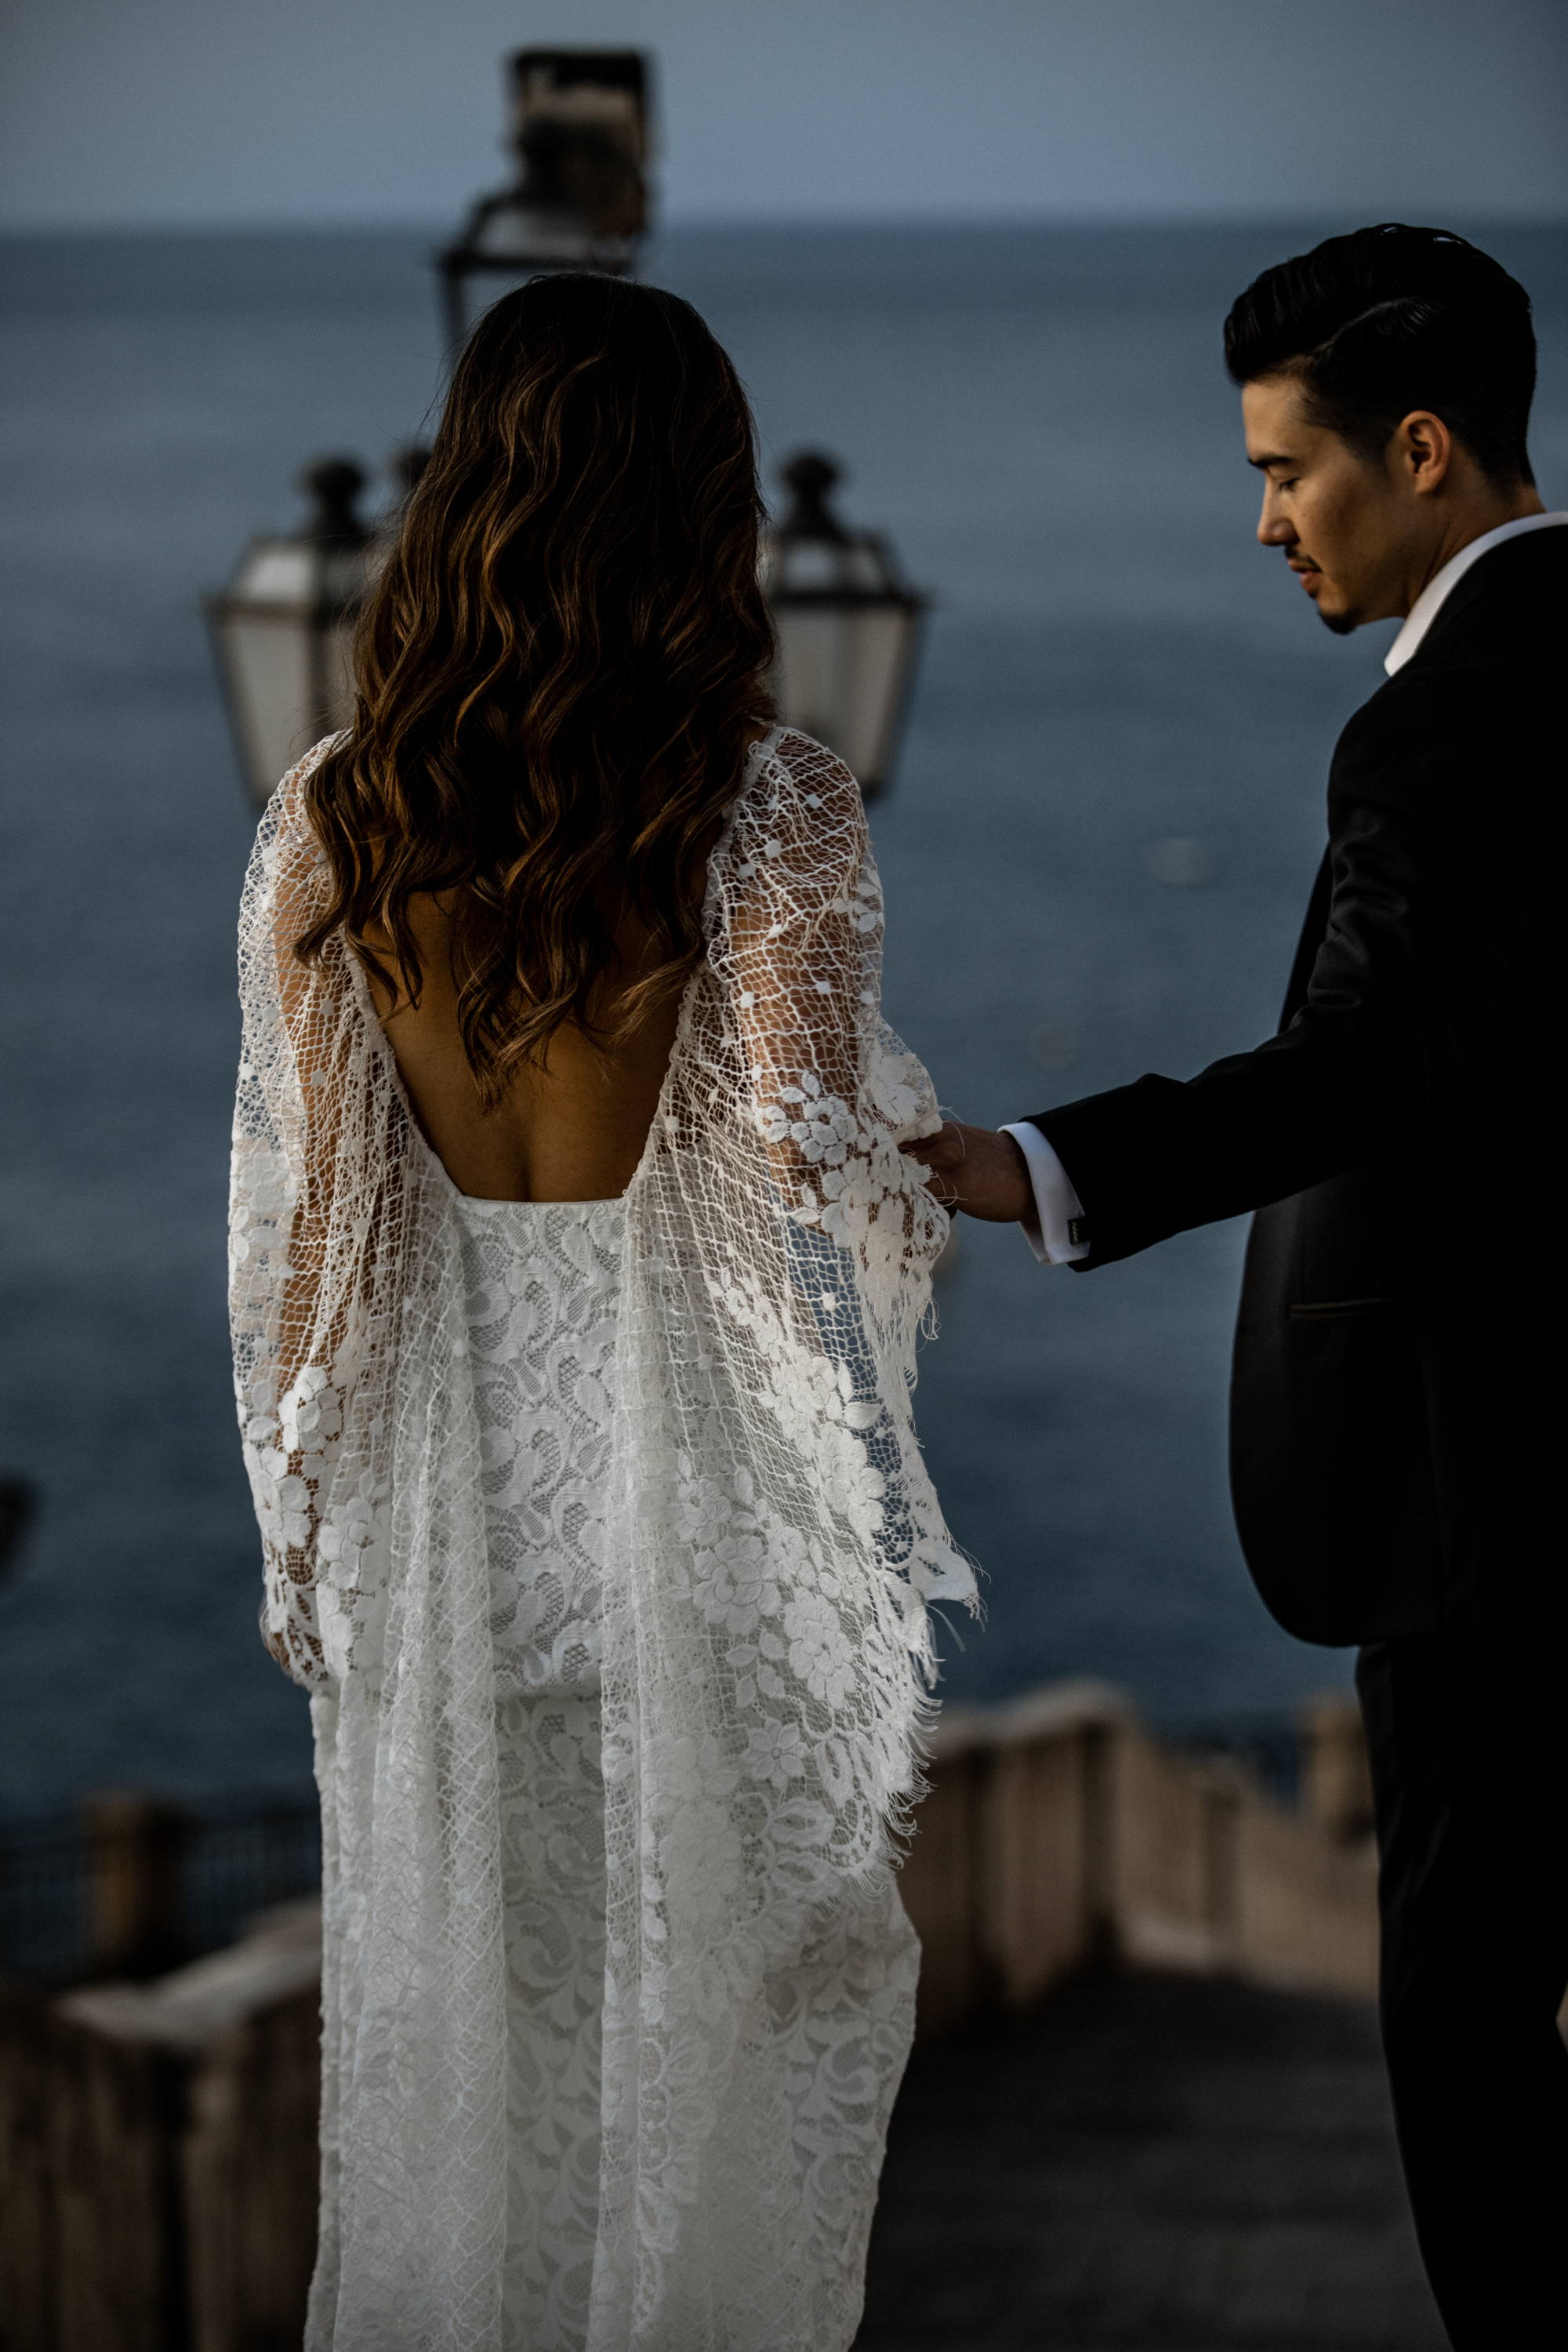 Bride wearing a lace dress draping over the shoulder with her groom wearing a black suit